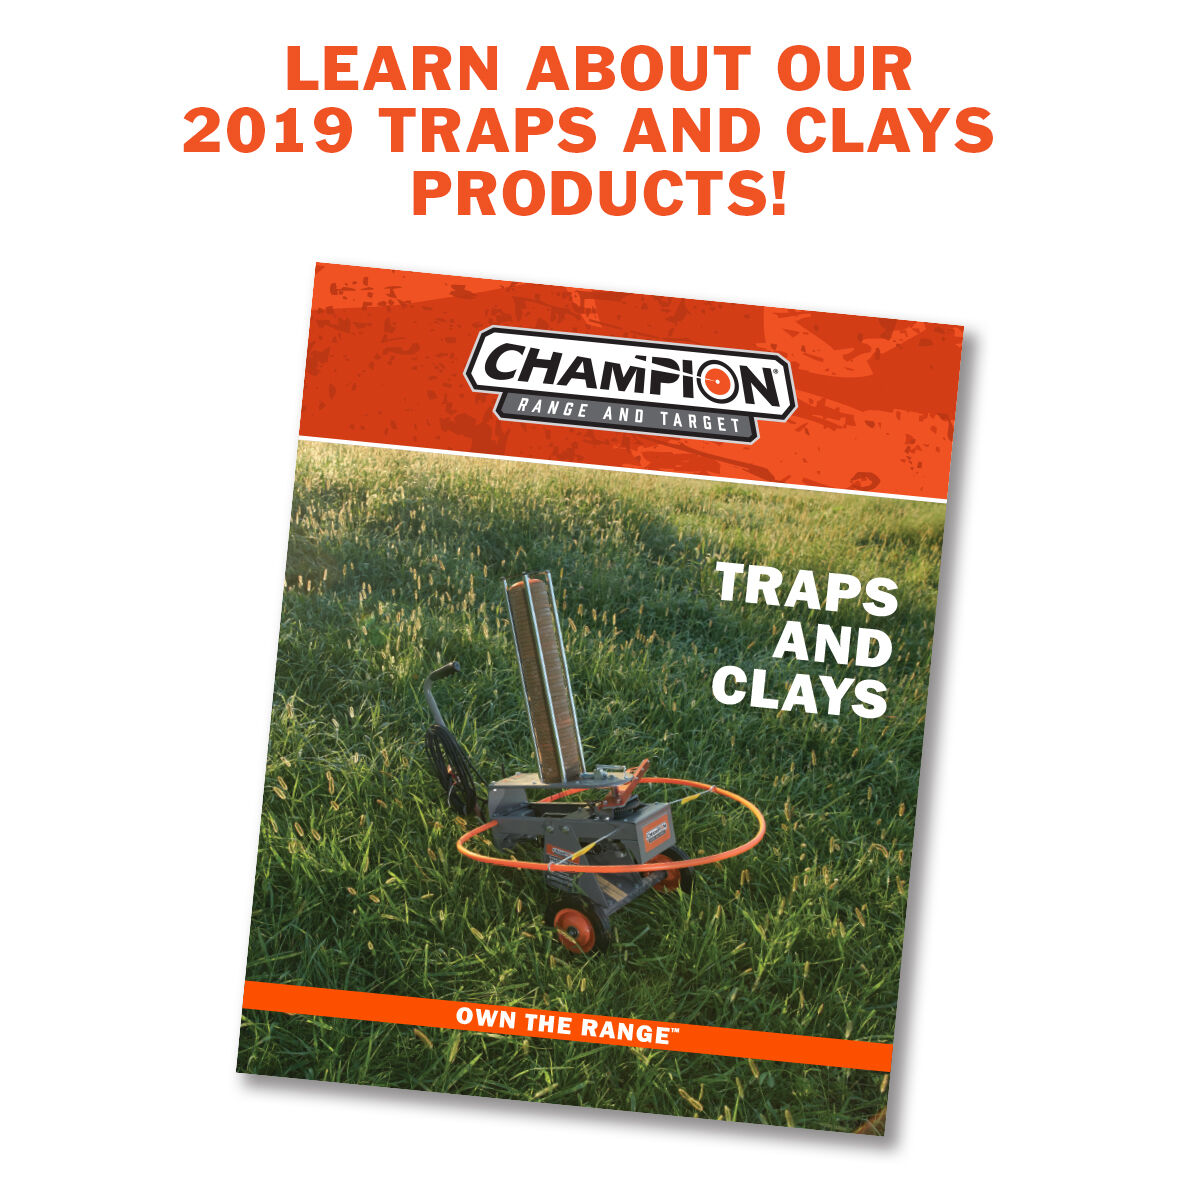 Traps and Clays Brochure